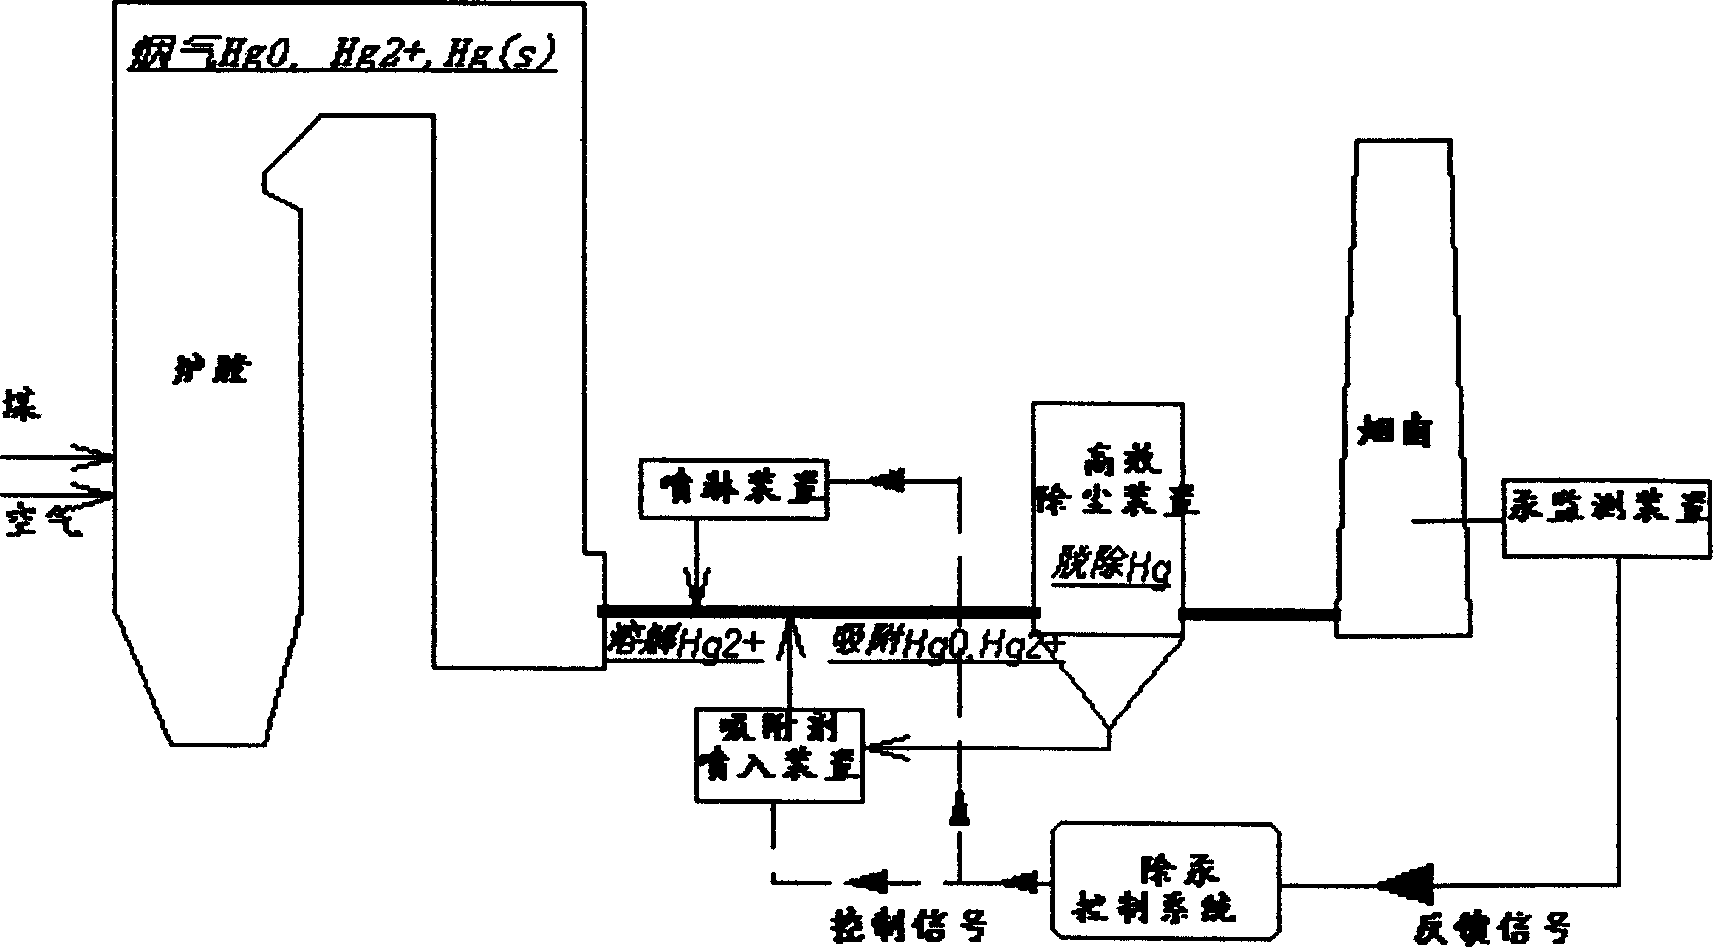 Coal-fired mercury discharge control method based on semi-dry process